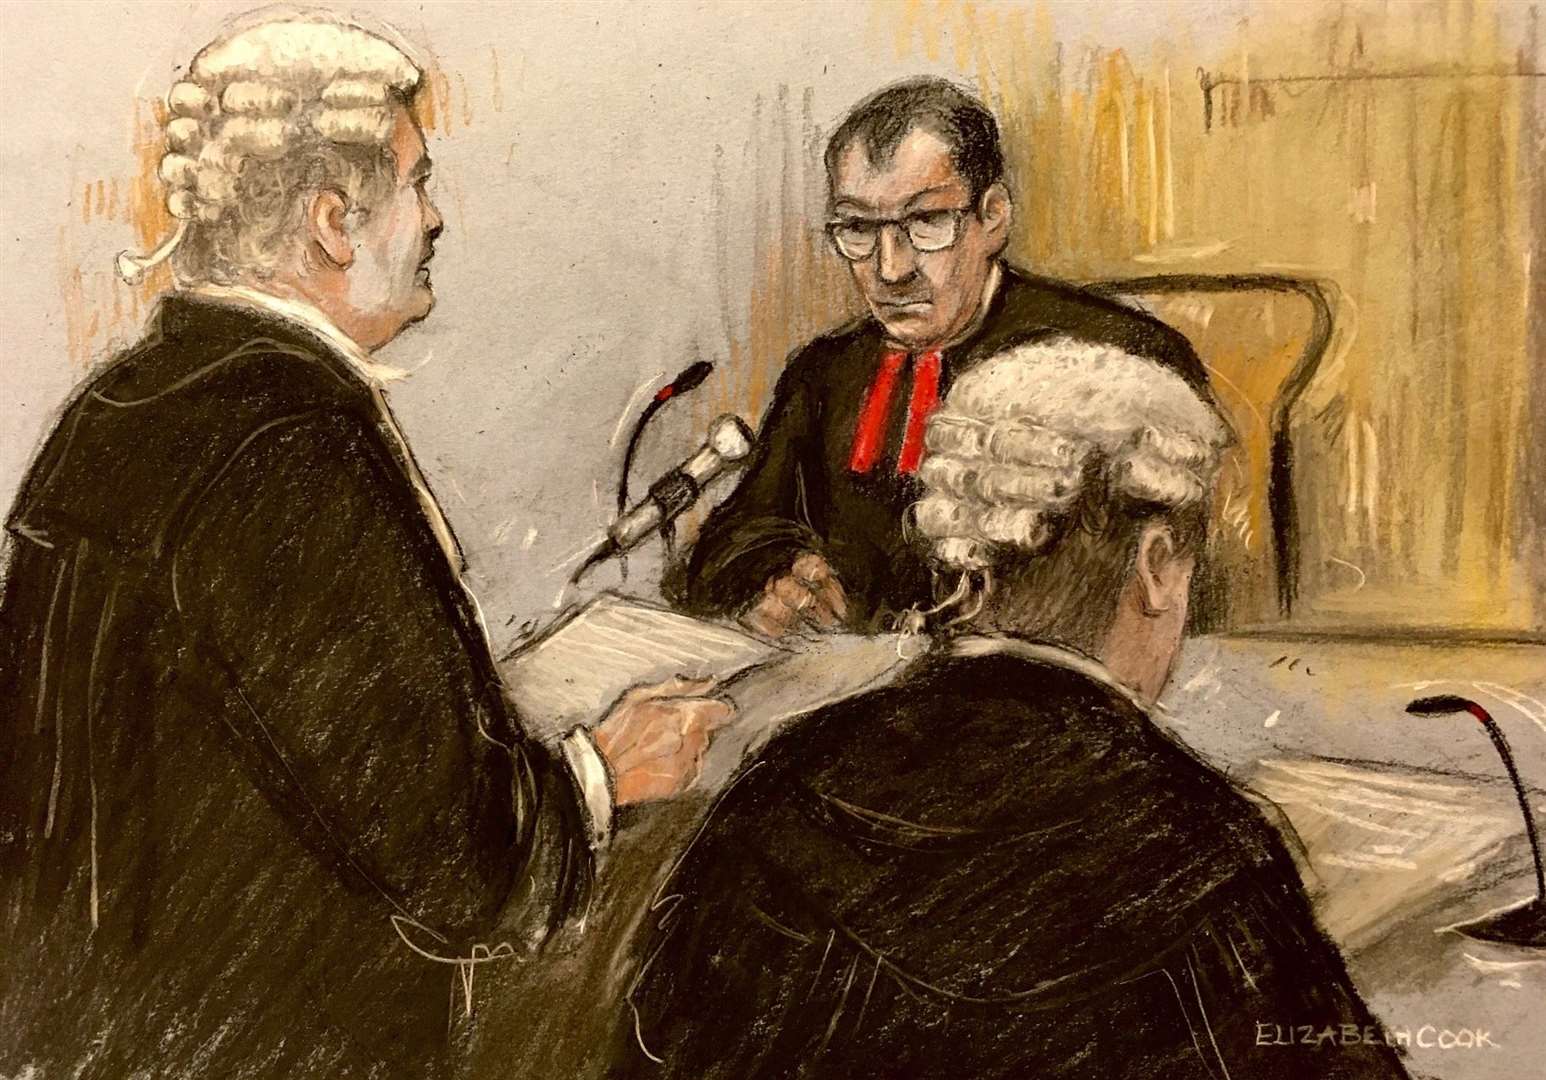 Hugh Tomlinson QC, representing Rebekah Vardy, judge Mr Justice Warby and David Sherborne, representing Coleen Rooney, at the Royal Courts of Justice, in central London, during the first hearing in Mrs Vardy’s High Court libel claim against Mrs Rooney.(Elizabeth Cook/PA)